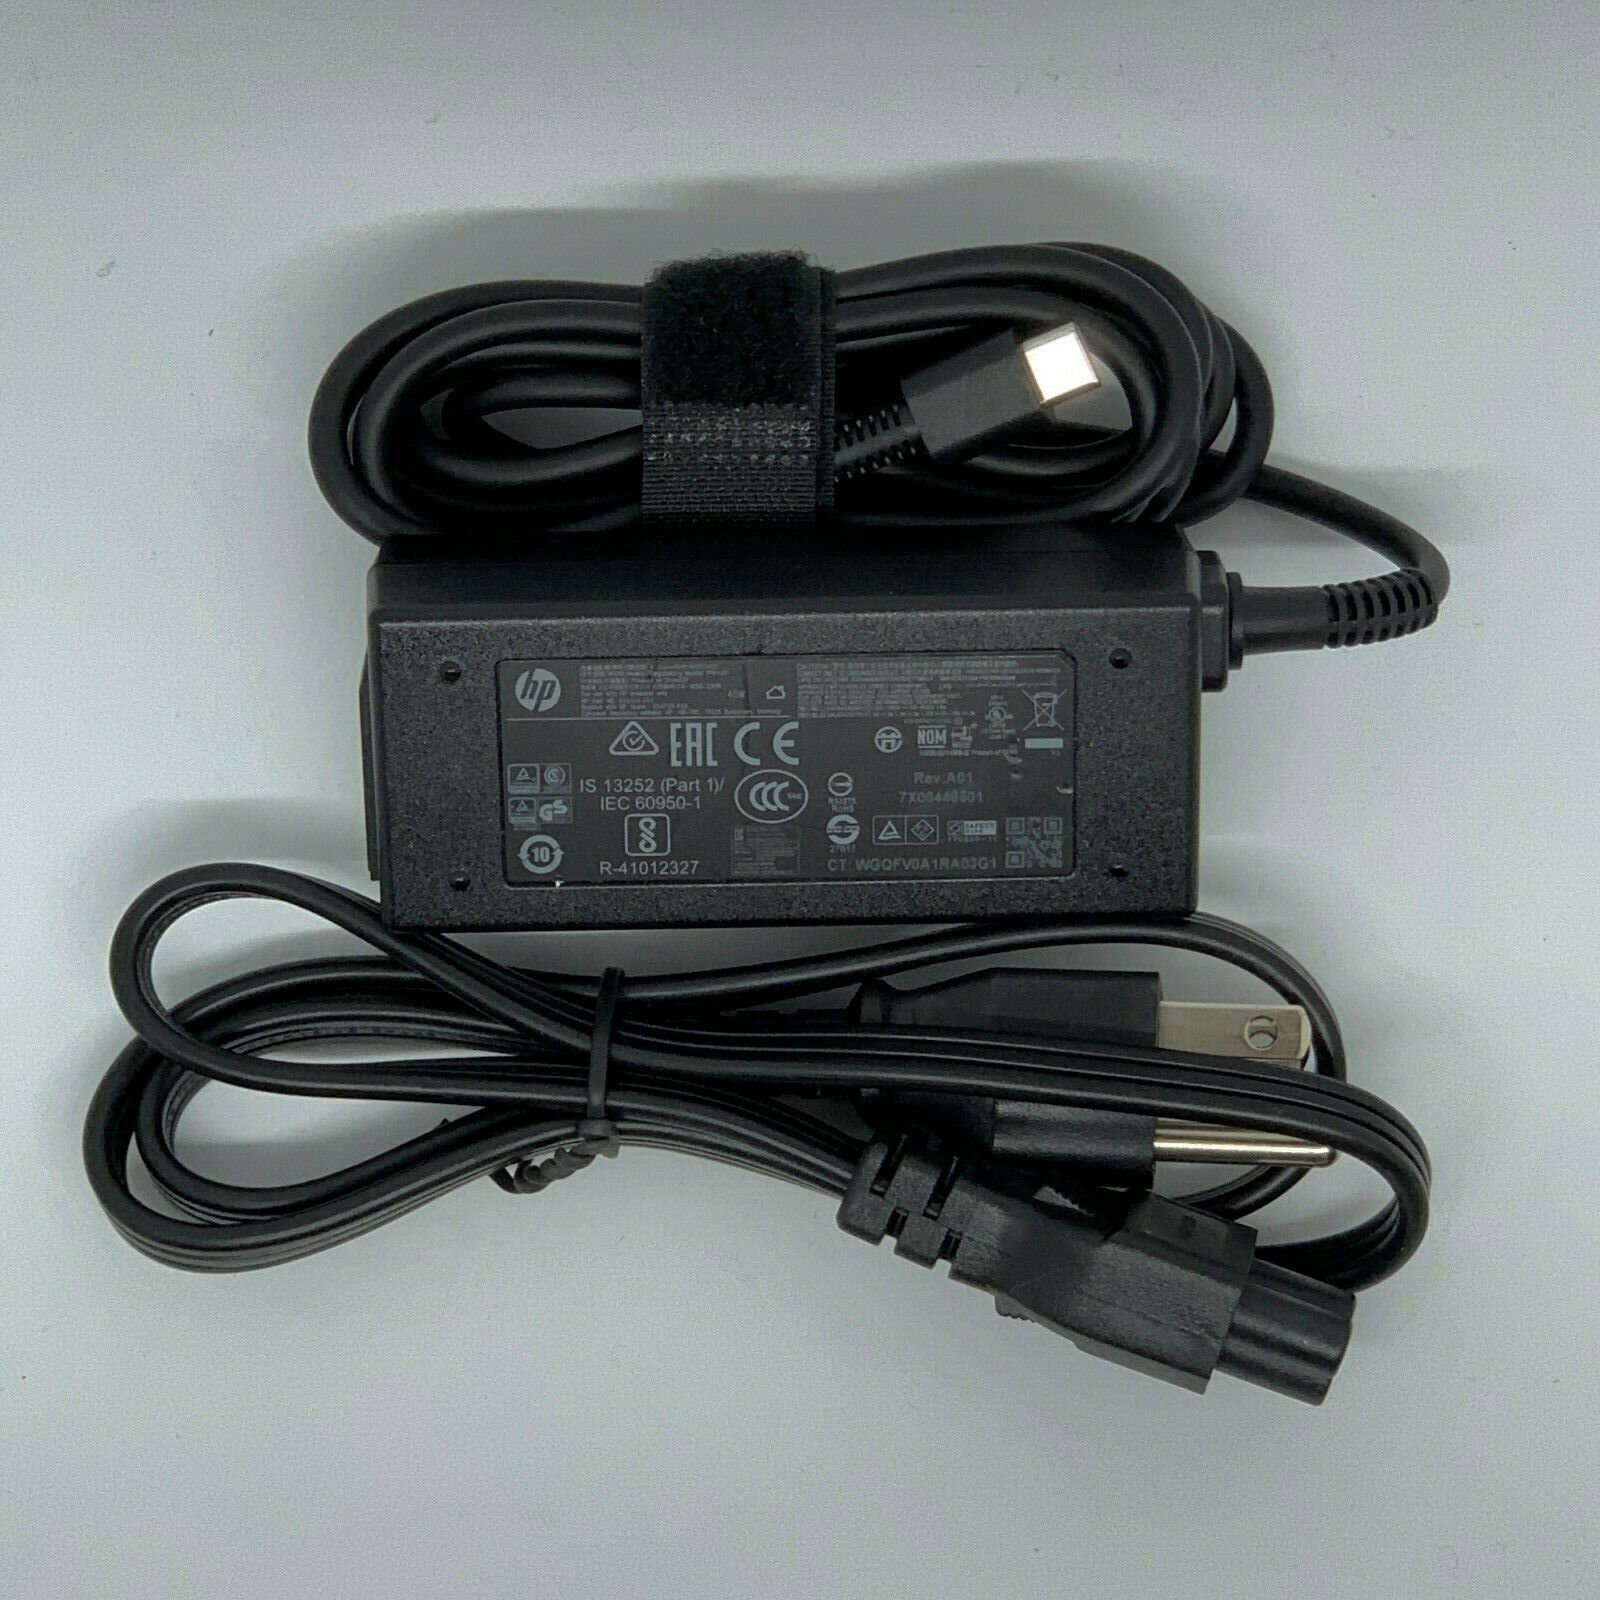 NEW Genuine 45w USB-C Charger AC Power Adapter for HP L43407-001, 934739-850